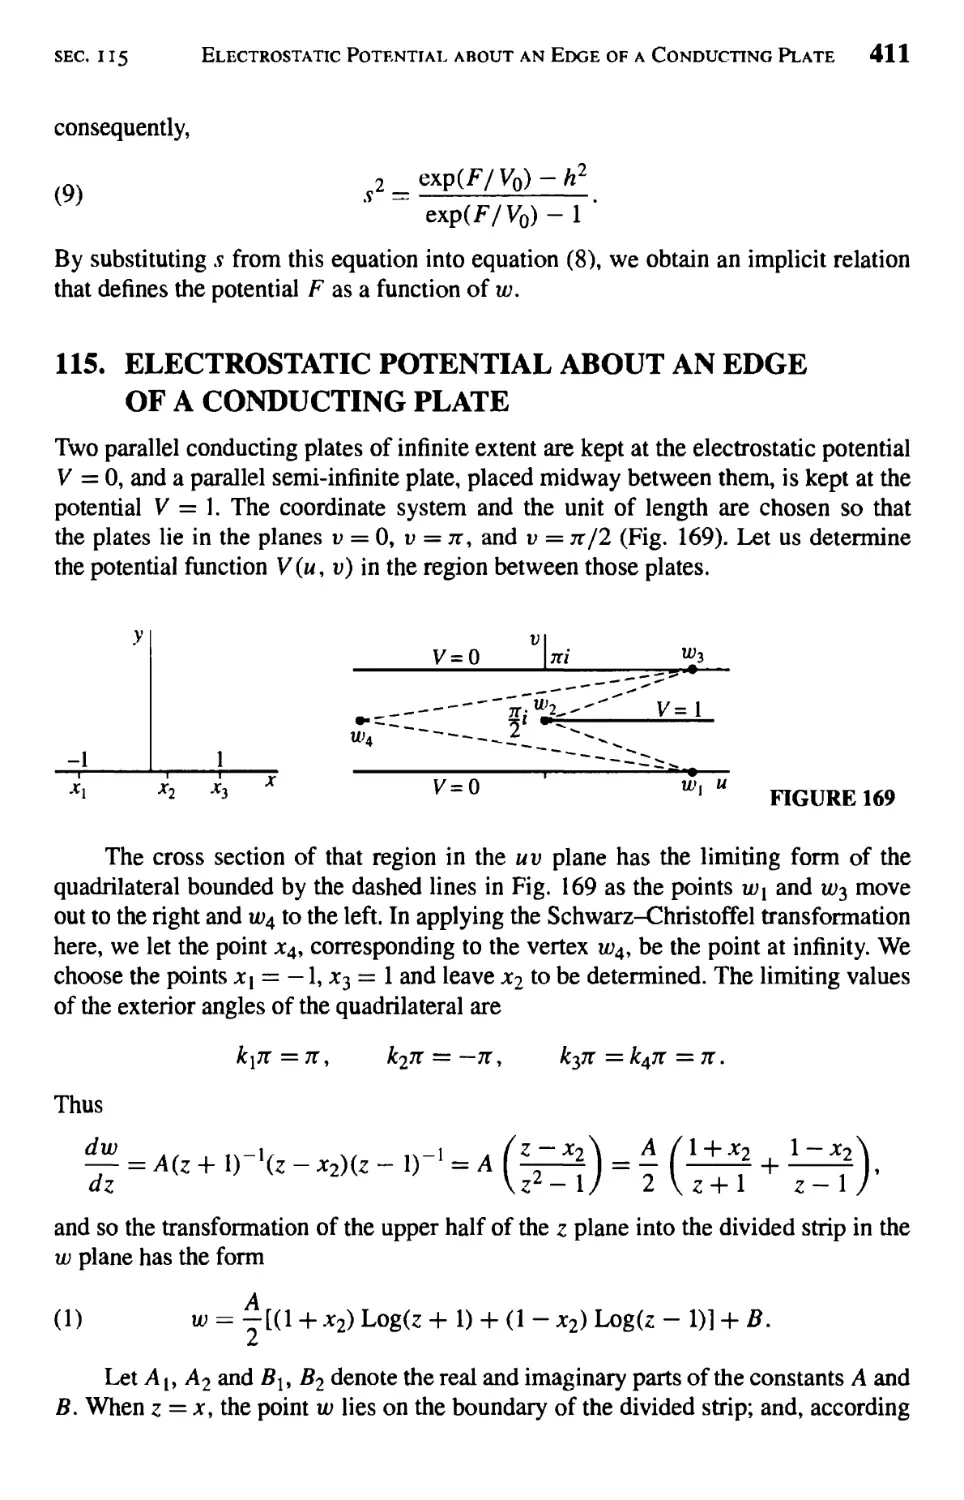 Electrostatic Potential about an Edge of a Conducting Plate